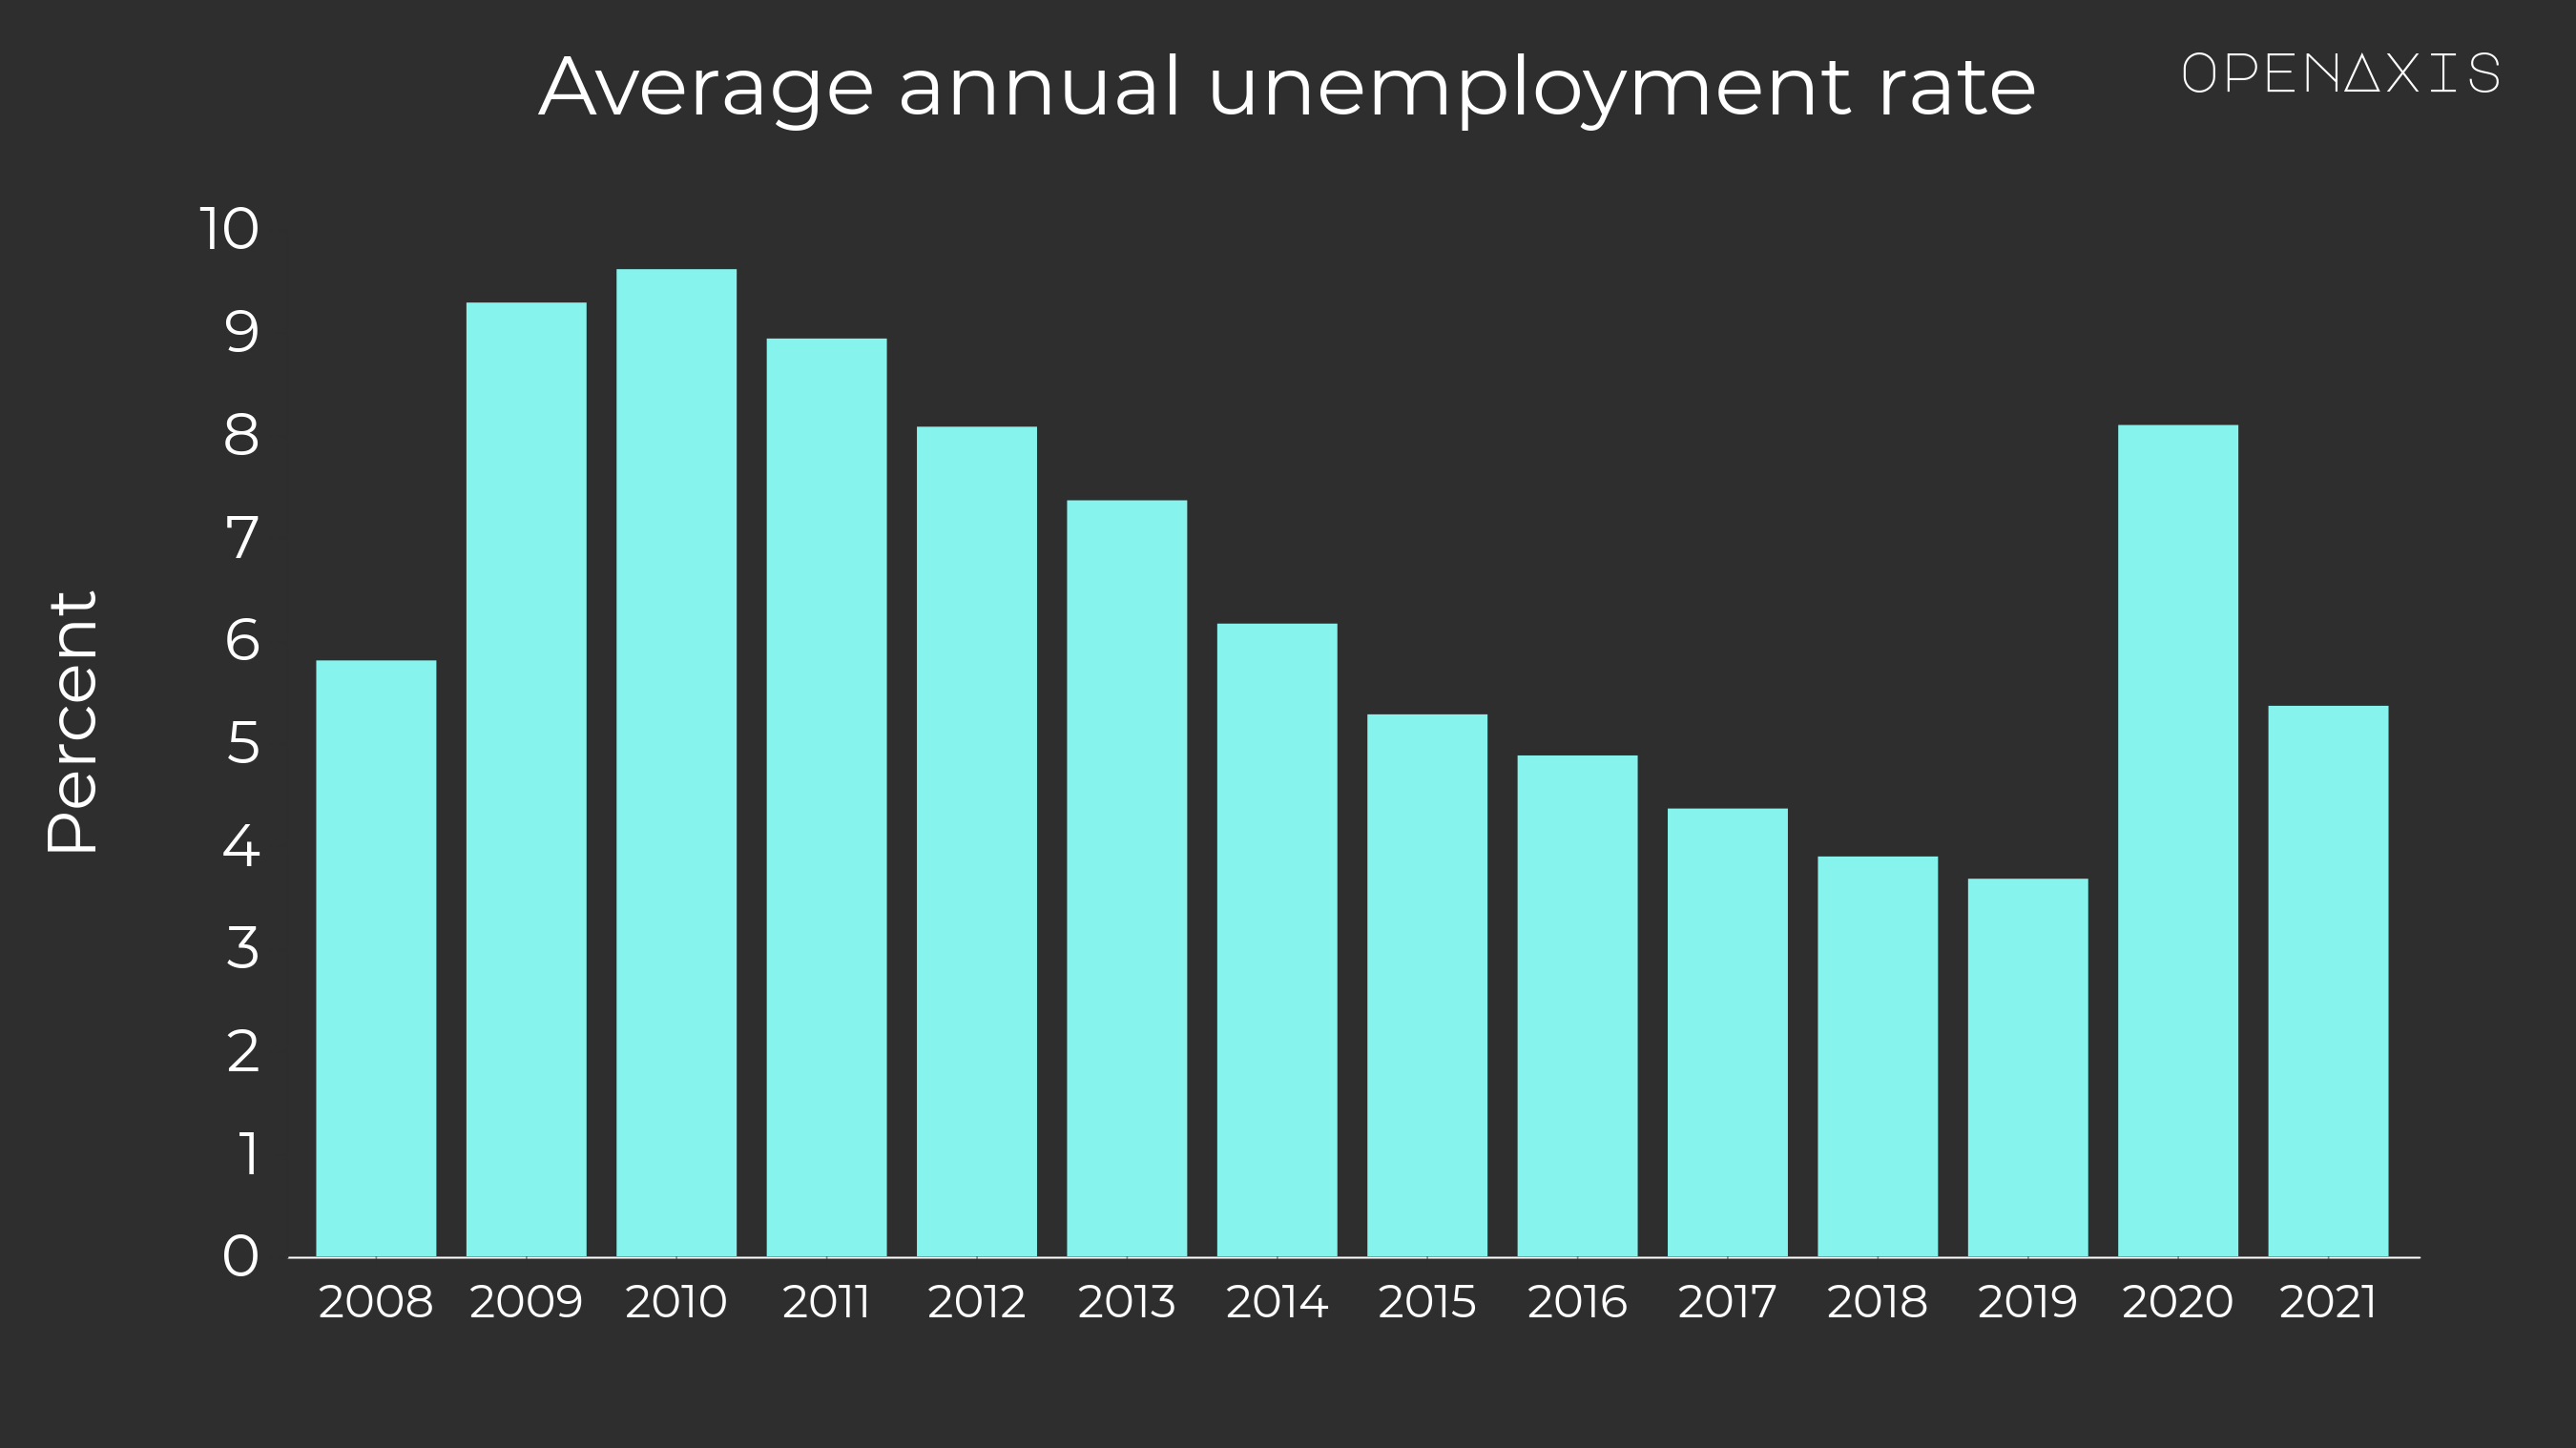 <p>Average Annual Unemployment Rate</p><p><br /></p><p>2021's average annual unemployment rate was 5.4%, 2.7 percentage points lower than the previous year but still the second highest since 2015.</p><p><br /></p><p><a href="https://app.openaxis.com/projects/openaxis/State-of-the-Union-2022" target="_blank">Return to State of the Union 2022 project by OpenAxis</a></p><p>﻿<a href="/search?q=%23employment" target="_self">#employment</a>﻿ ﻿<a href="/search?q=%23economy" target="_self">#economy</a>﻿ ﻿<a href="/search?q=%23fred" target="_self">#fred</a>﻿ ﻿<a href="/search?q=%23sotu" target="_self">#sotu</a>﻿ </p>